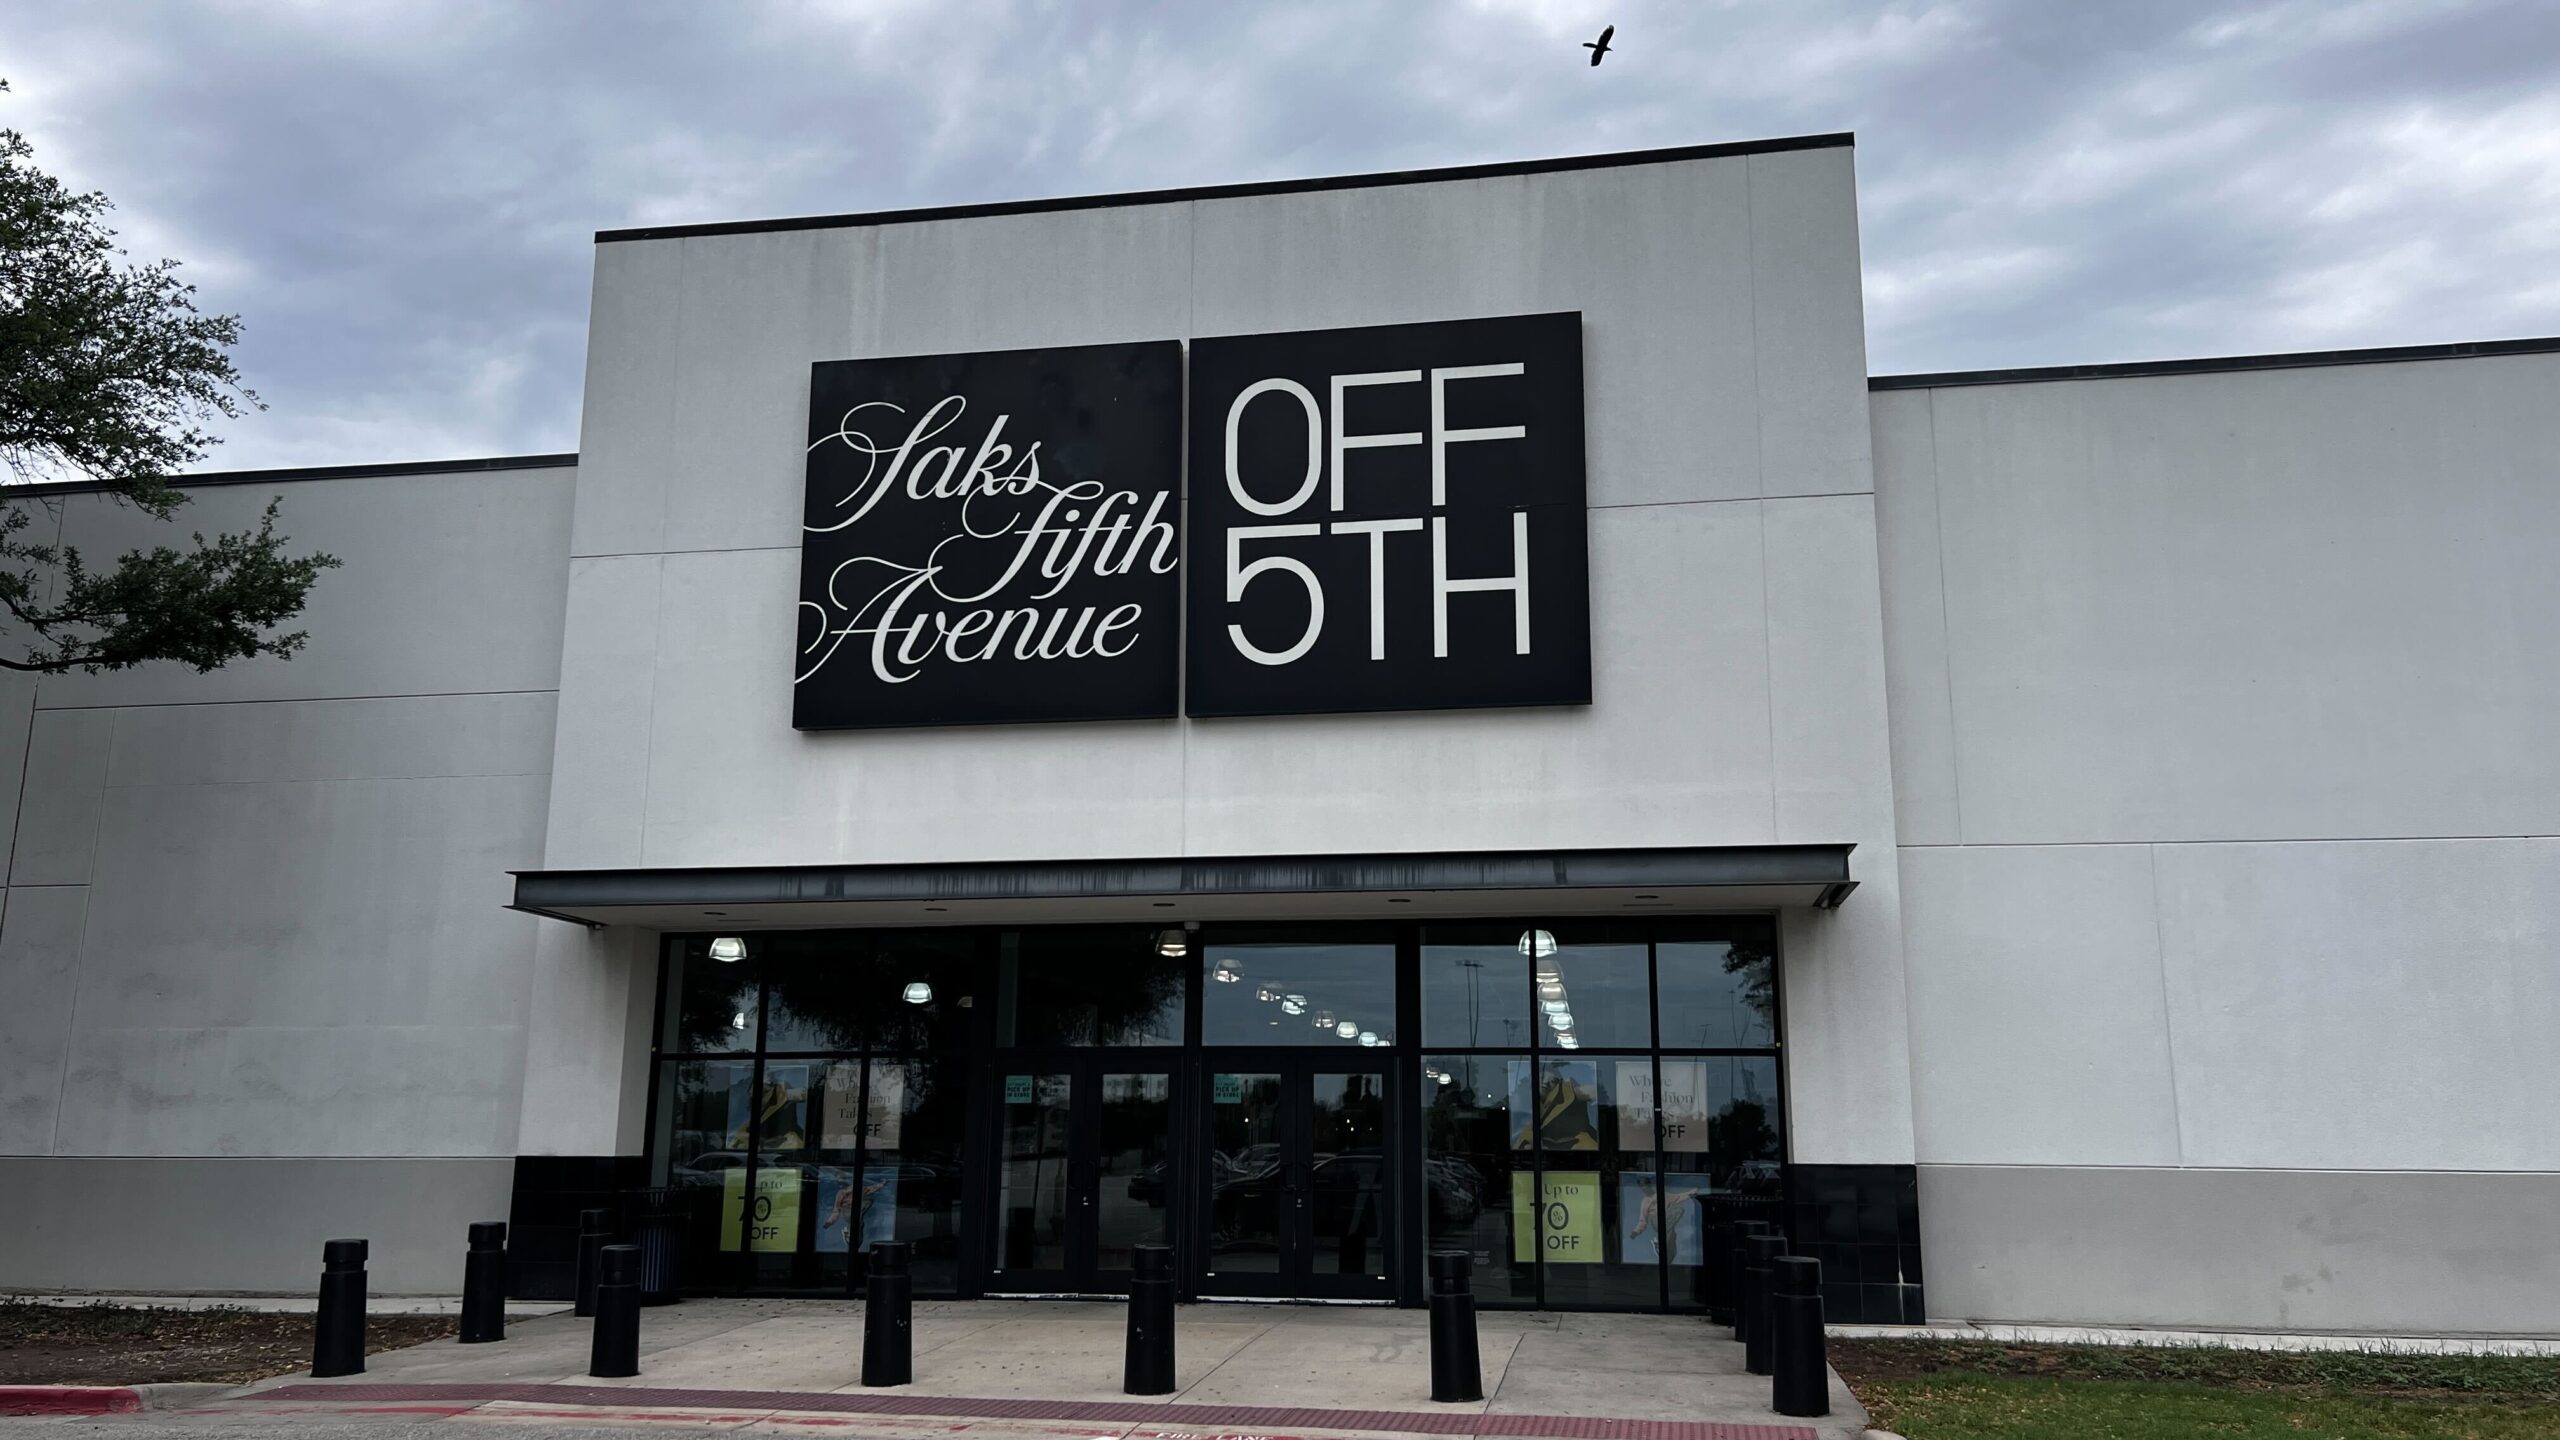 Saks 5th Avenue - Spend $150+ On Designer Brands & MORE & Score a FREE $75  Gift Card - The Freebie Guy®